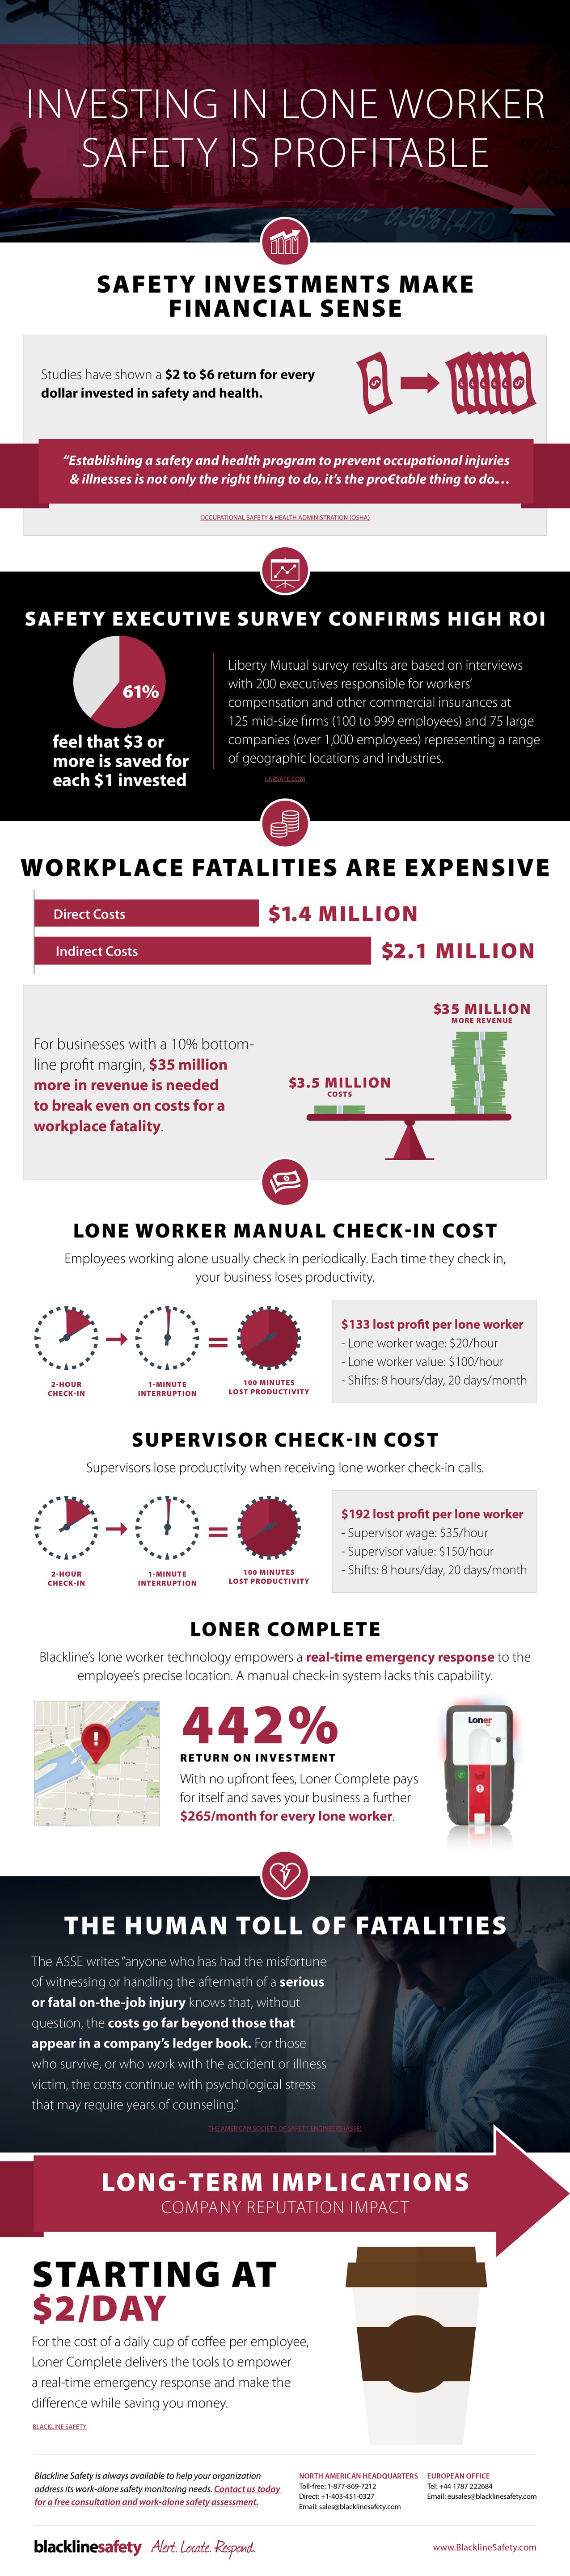 Lone worker safety — the profitable thing to do is invest.= in your must valuable asset, your employees.